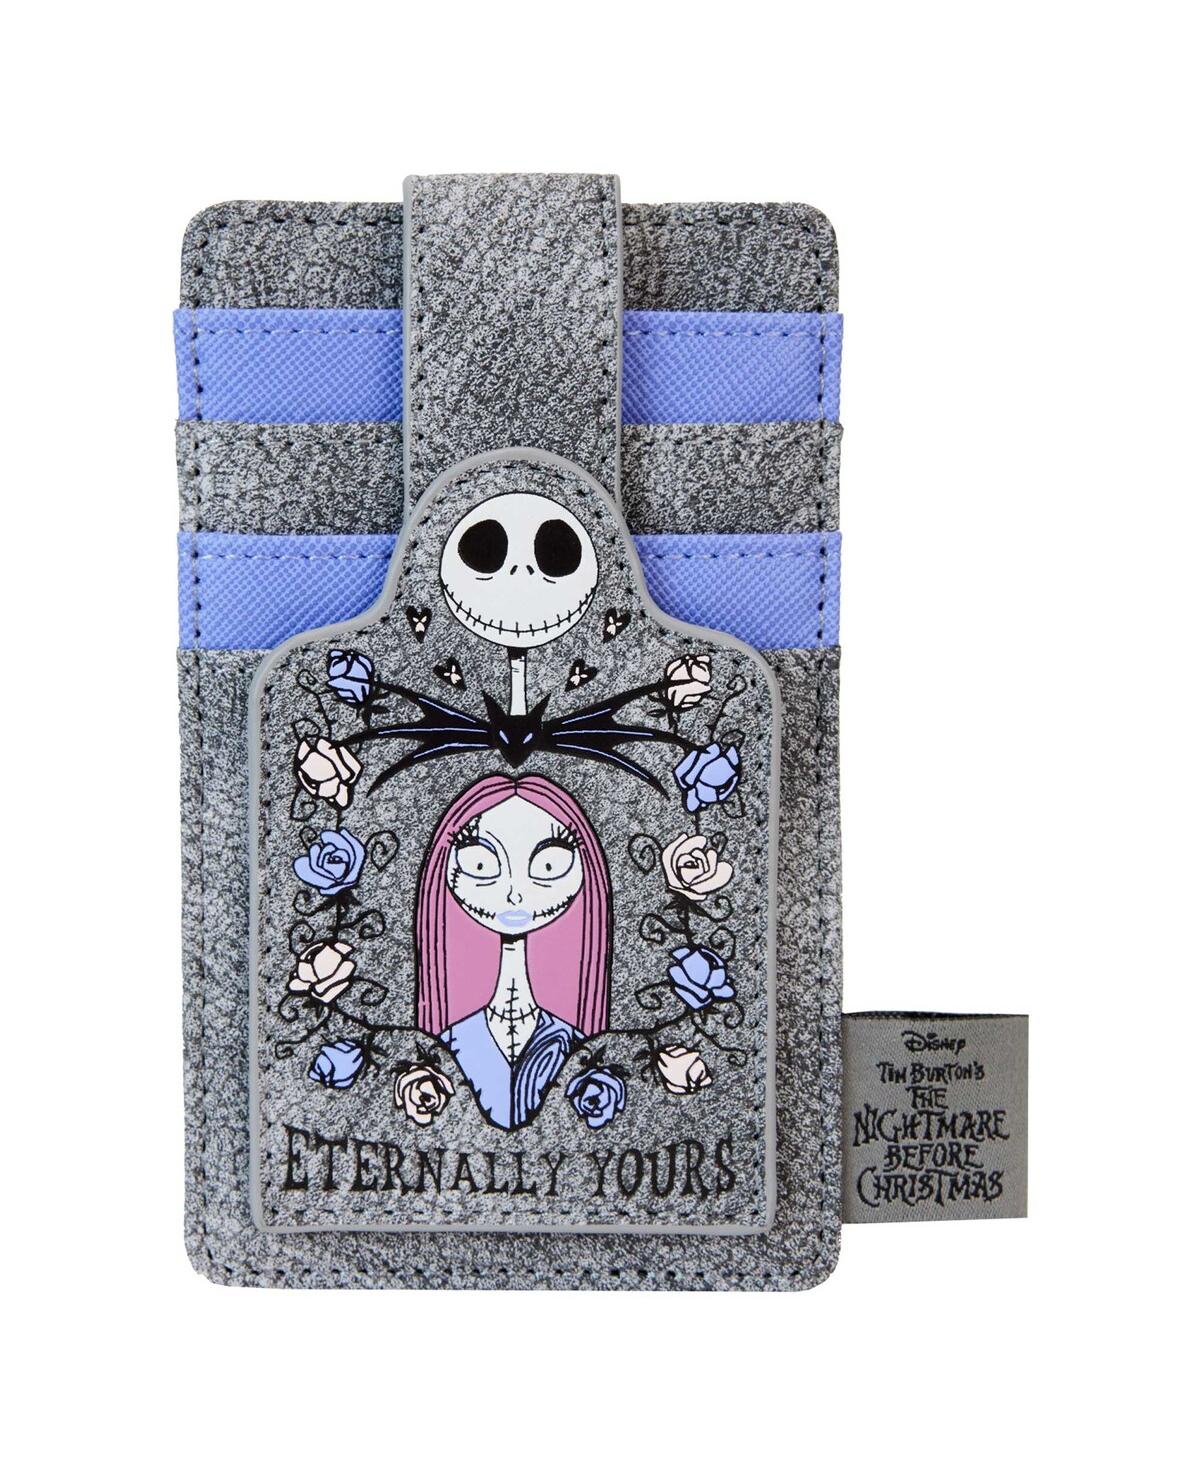 The Nightmare Before Christmas Jack and Sally Eternally Yours Cardholder - Multi